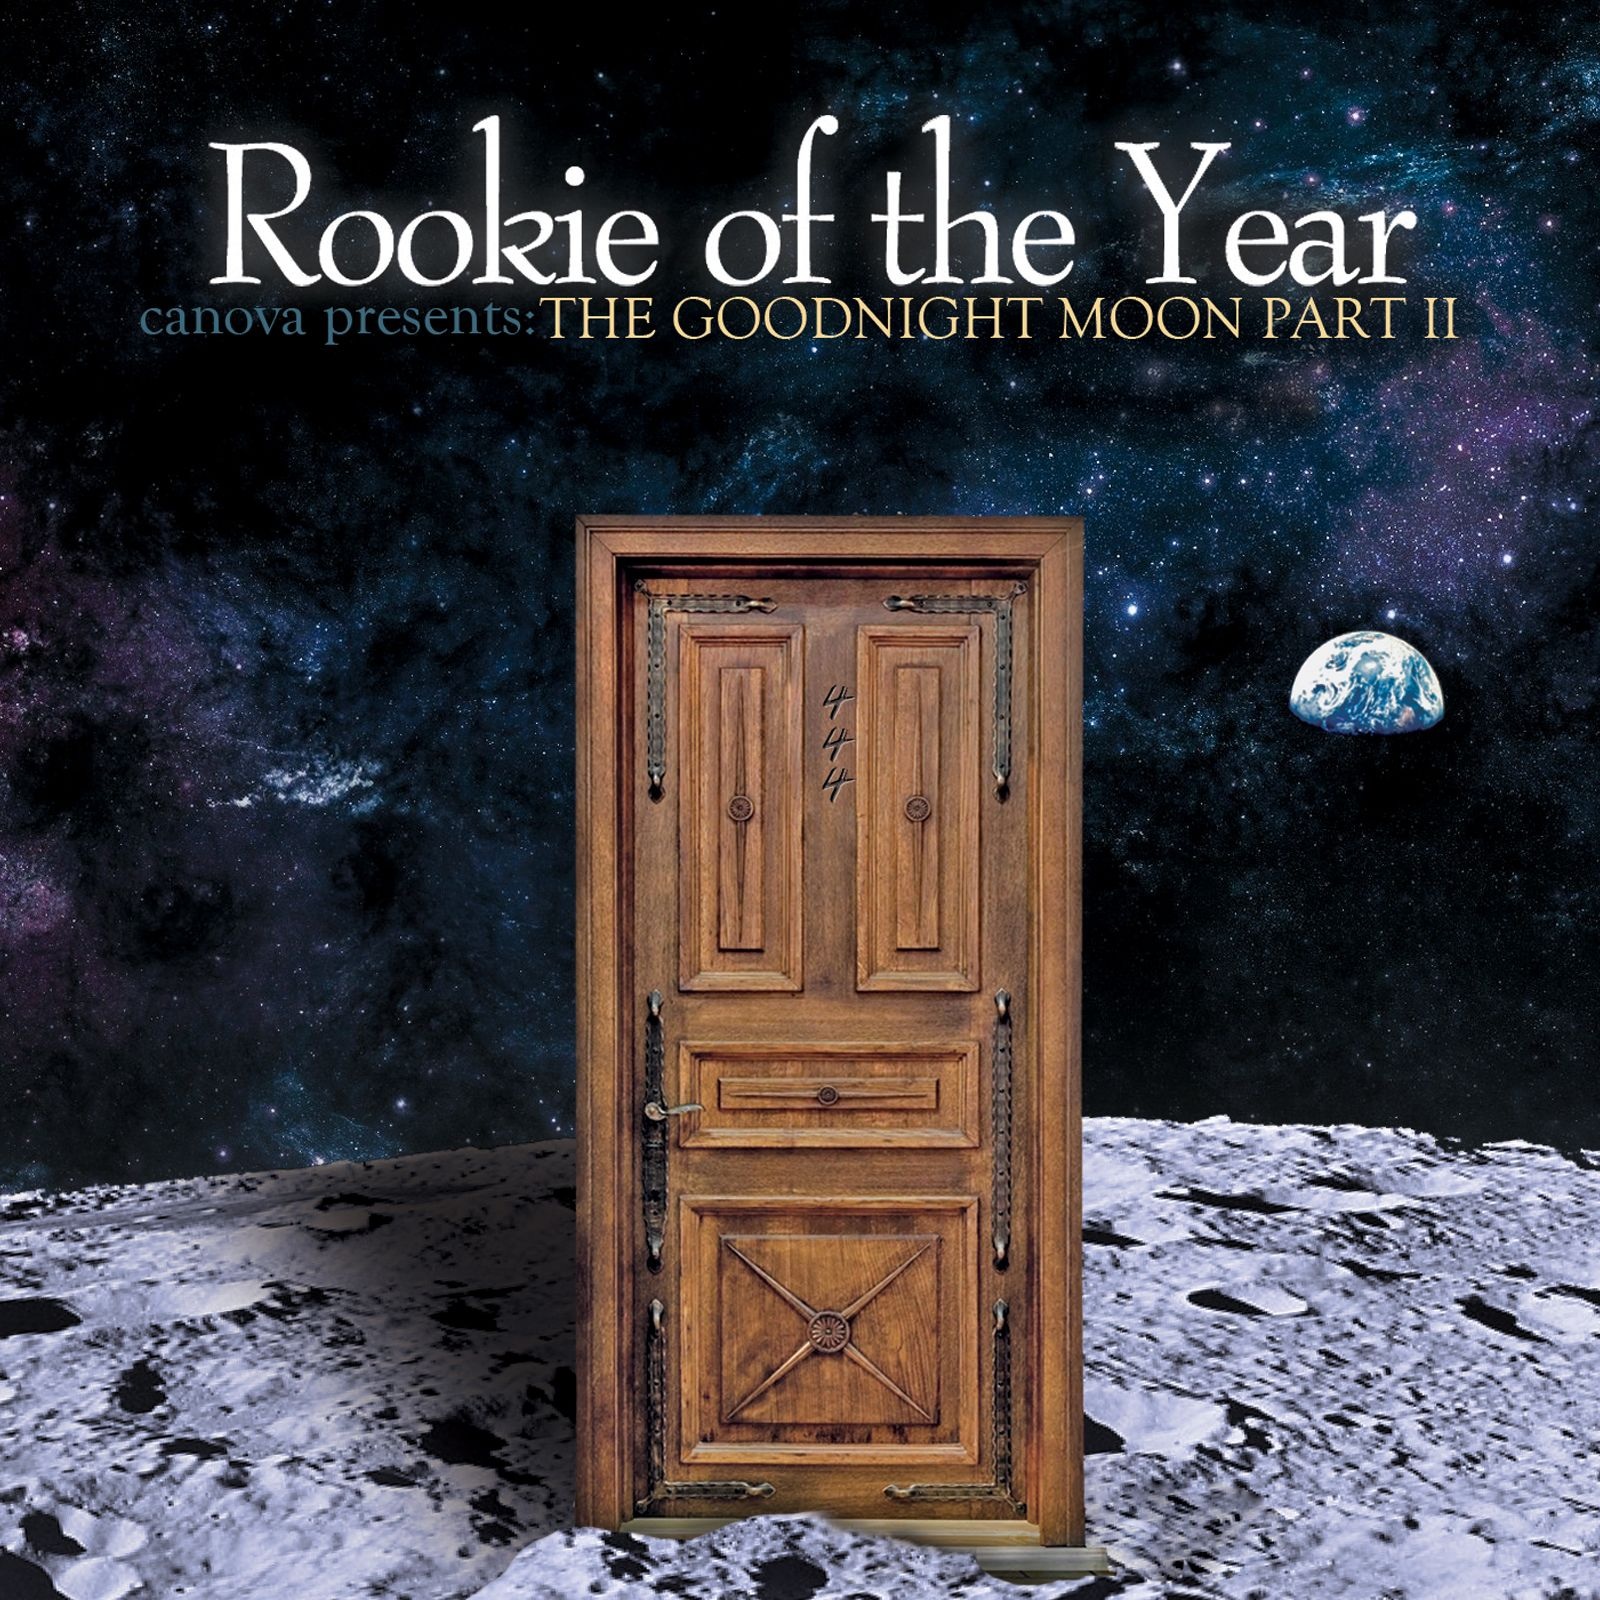 News Added Jul 26, 2013 Rookie Of The Year has released the track listing and album art for Goodnight Moon Part II. Submitted By Aidan Track list: Added Jul 26, 2013 01) Everything 02) Love/me/Crazy 03) ...light years away 04) Three Words 05) Wild and Free (The Way it Goes) 06) Colors of Summer 07) […]